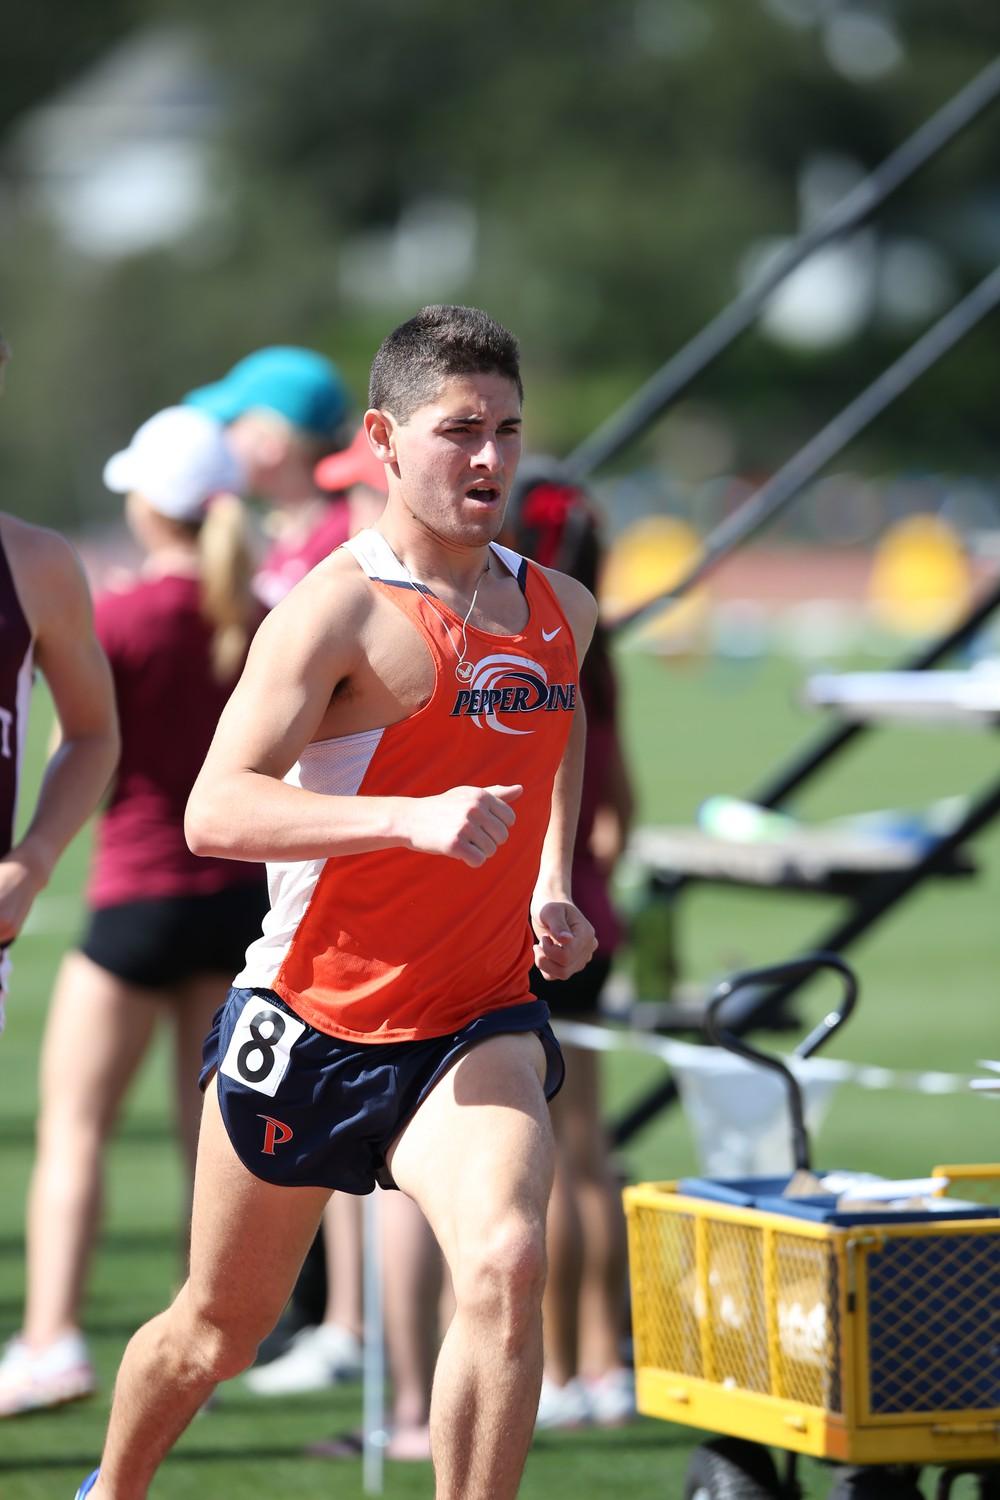 Aston runs for Pepperdine Track in 2013. Aston said he has evolved much as a person since his graduation in 2014. Photo courtesy of Pepperdine Athletics